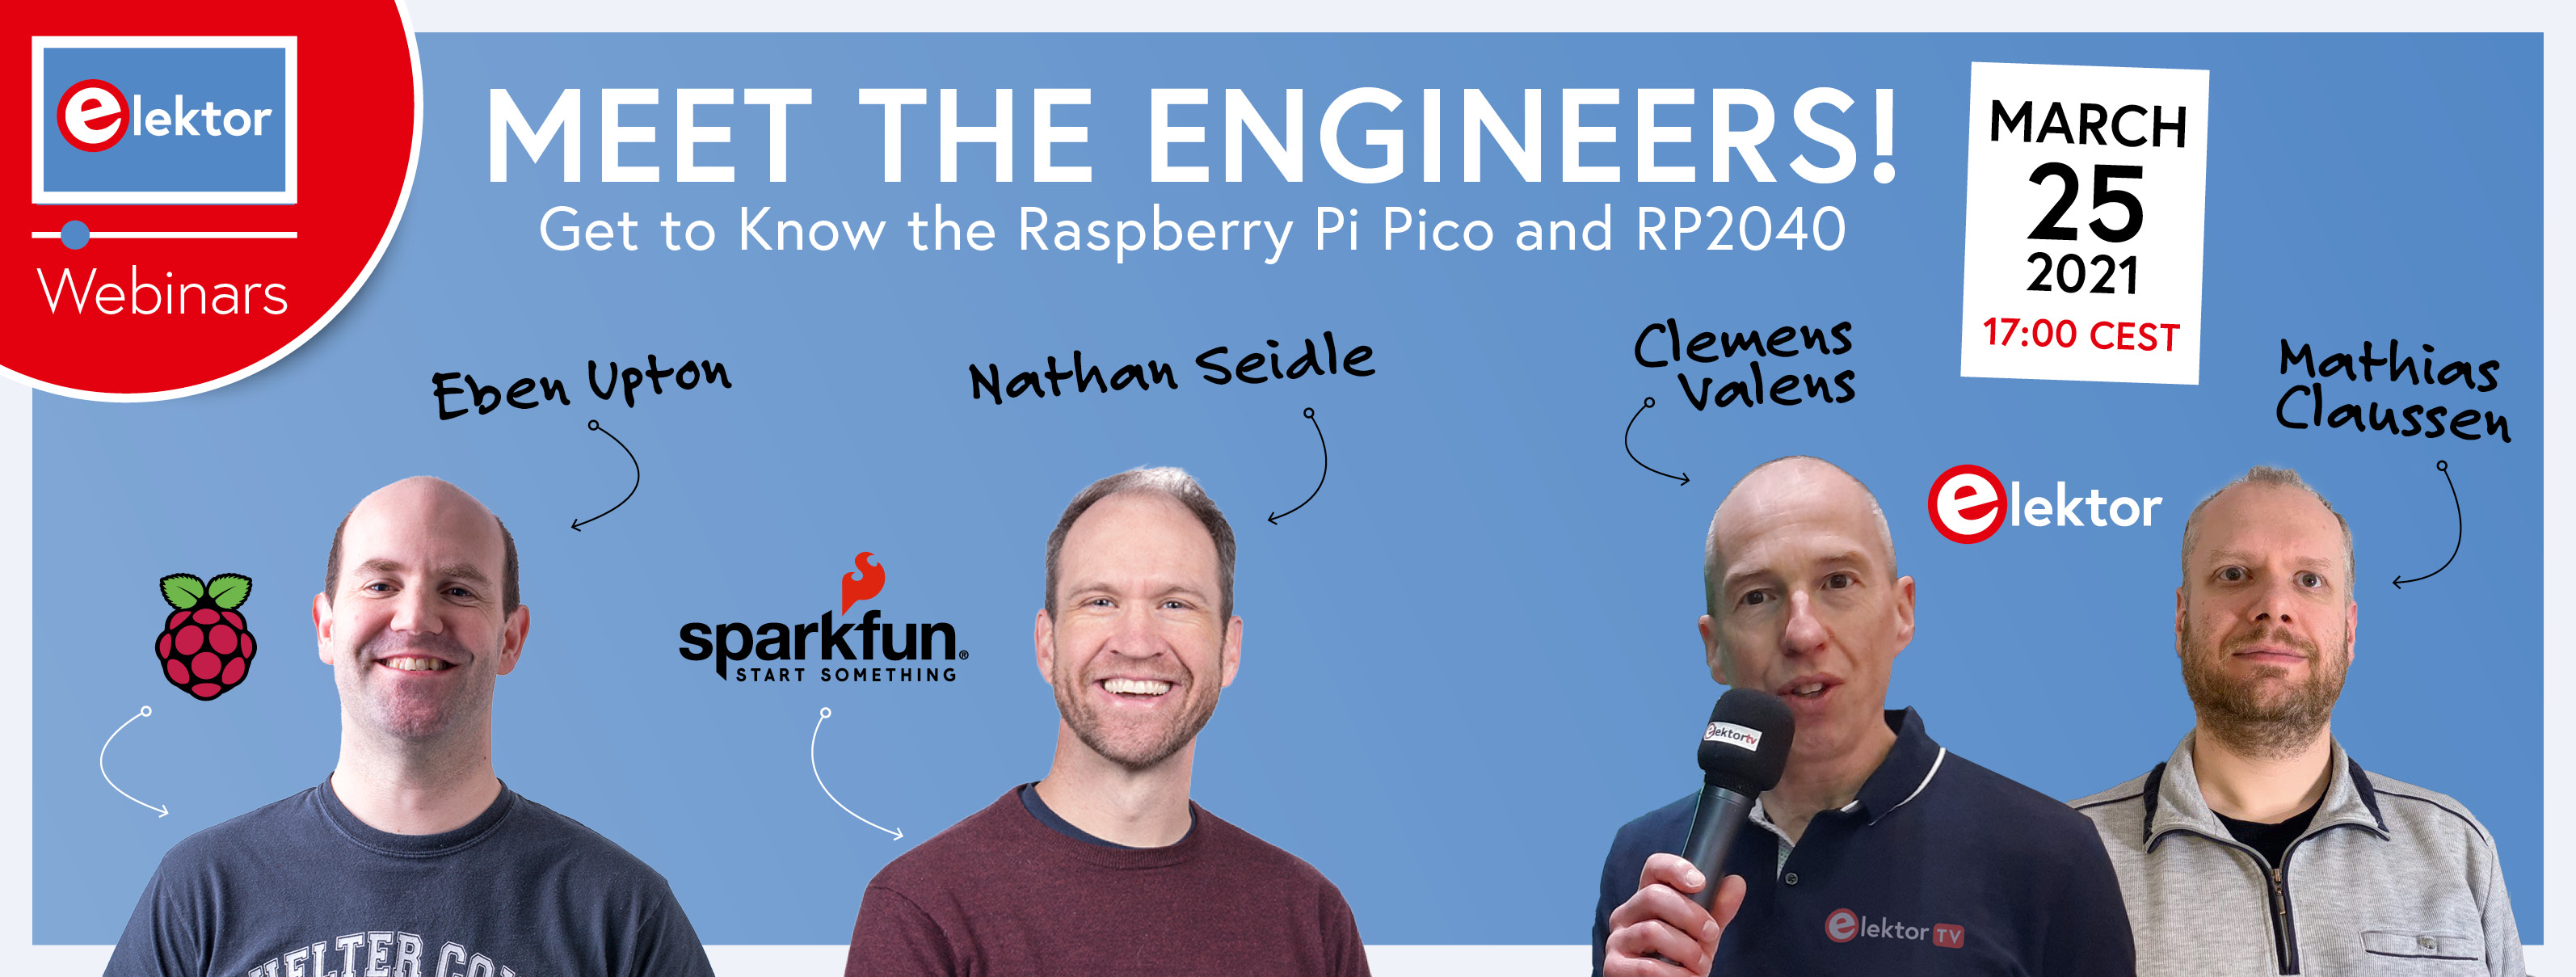 Get to Know the Raspberry Pi Pico and RP2040